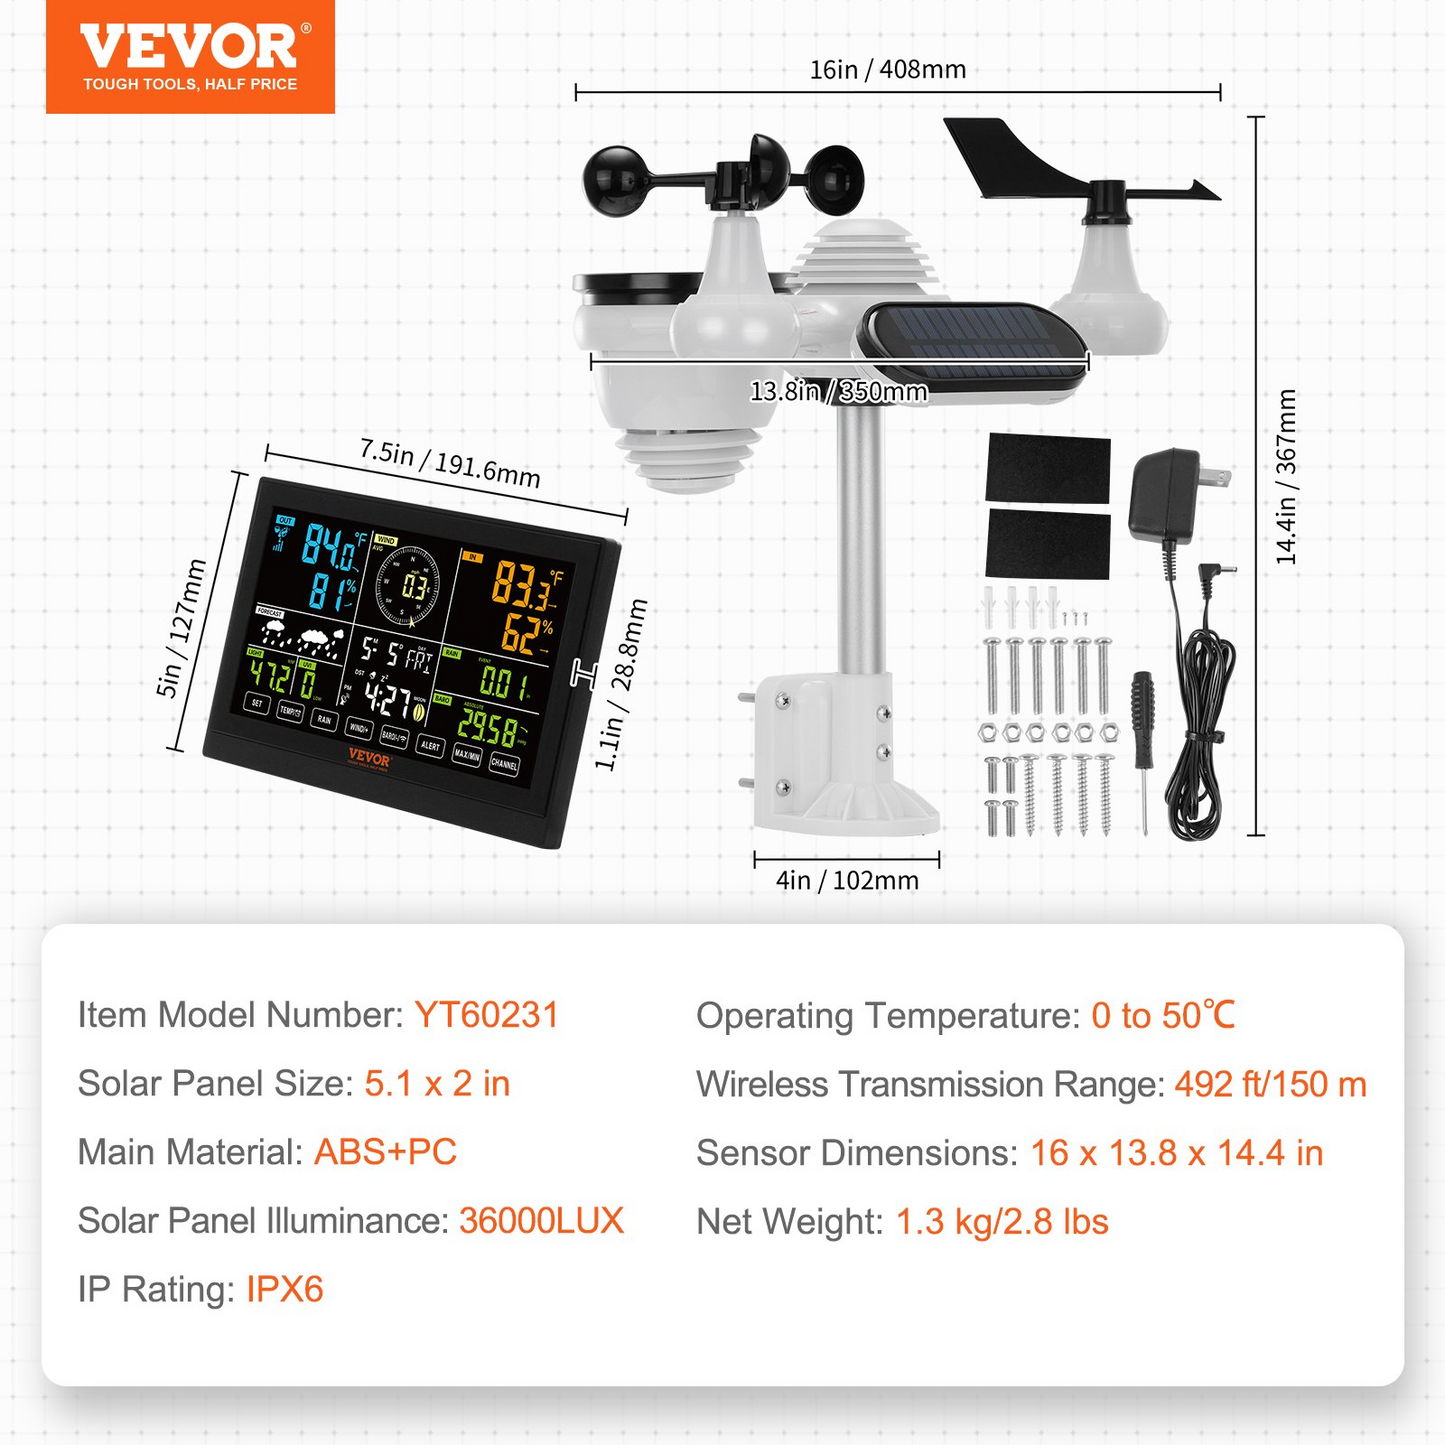 VEVOR 7-in-1 Wireless Weather Station, 7.5 in Large Color Display, Digital Home Weather Station Indoor Outdoor, for Temperature Humidity Wind Speed/Direction Rain UV, with Forecast Data, Alarm, Alerts